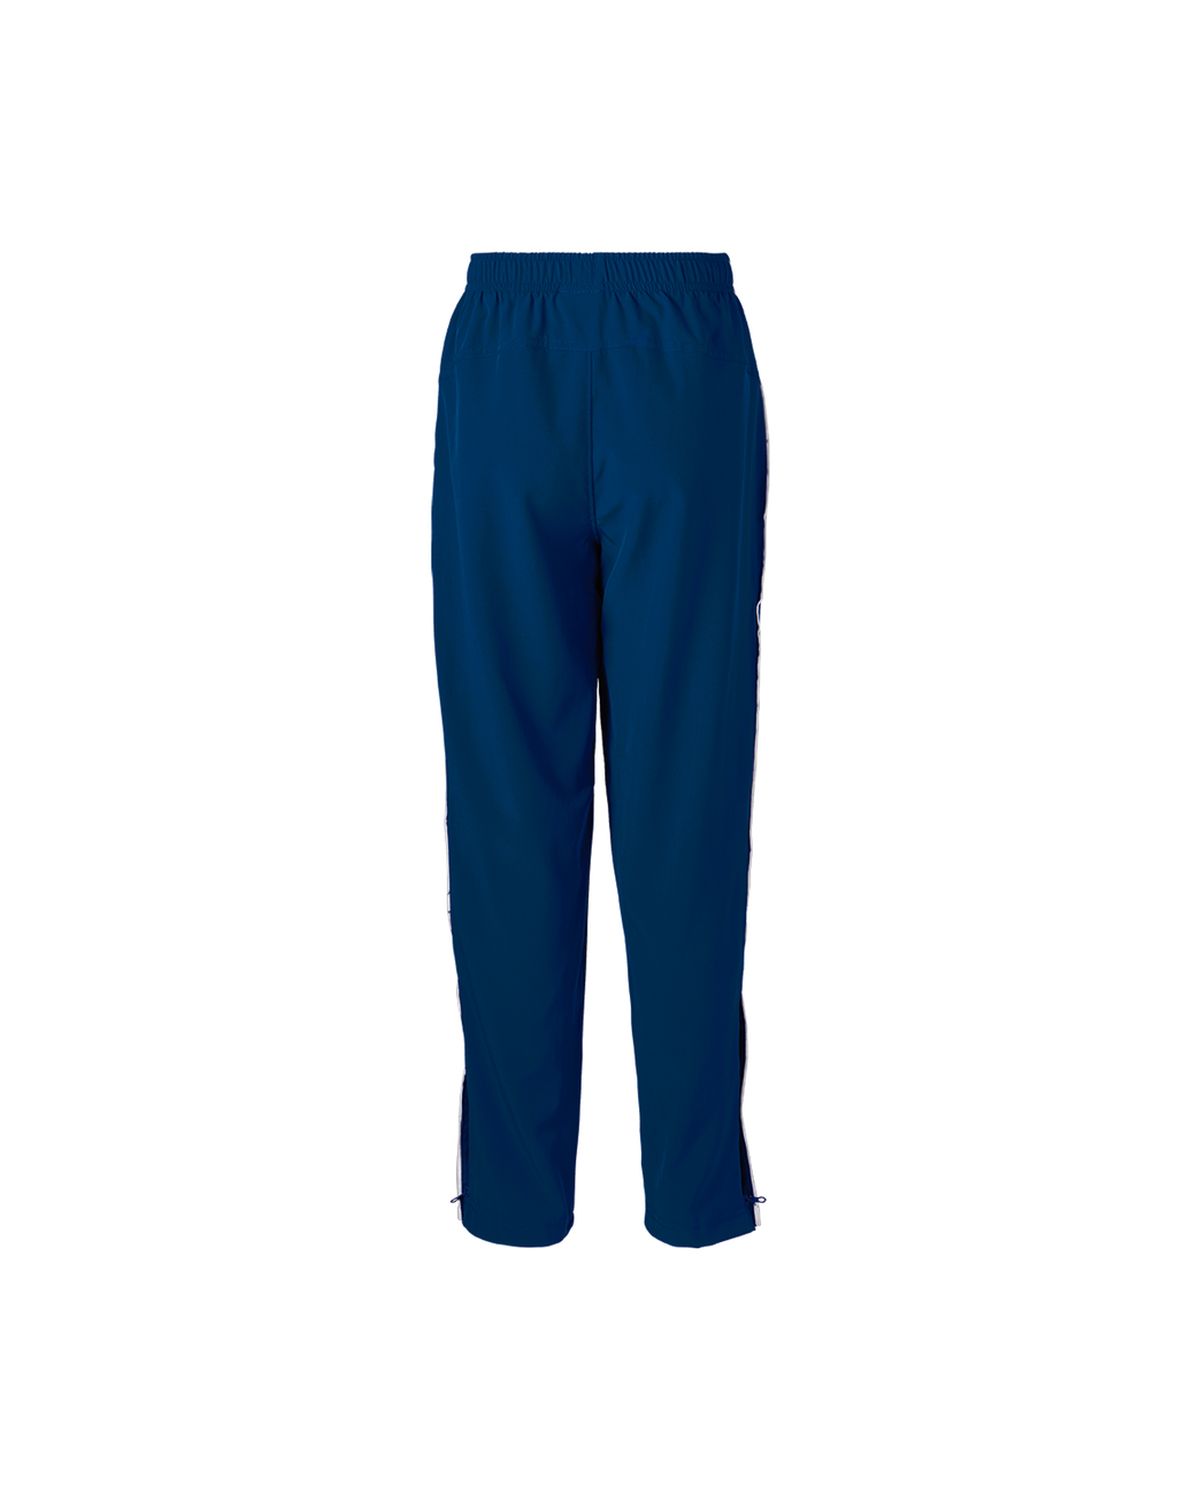 Soffe Youth Game Time Warm Up Pant